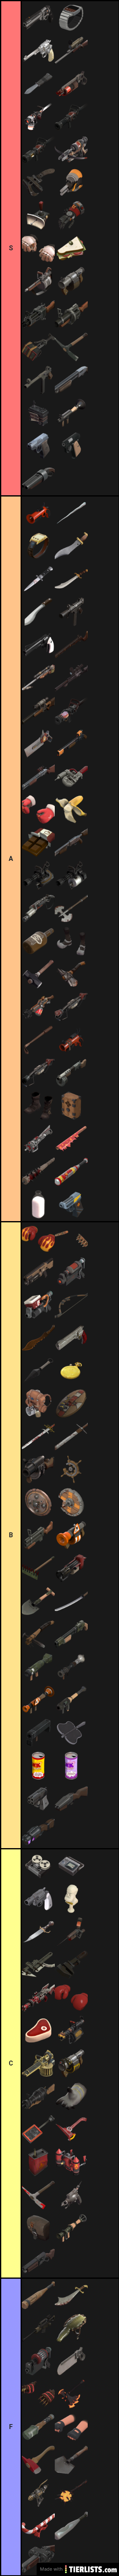 Tf2 weapons